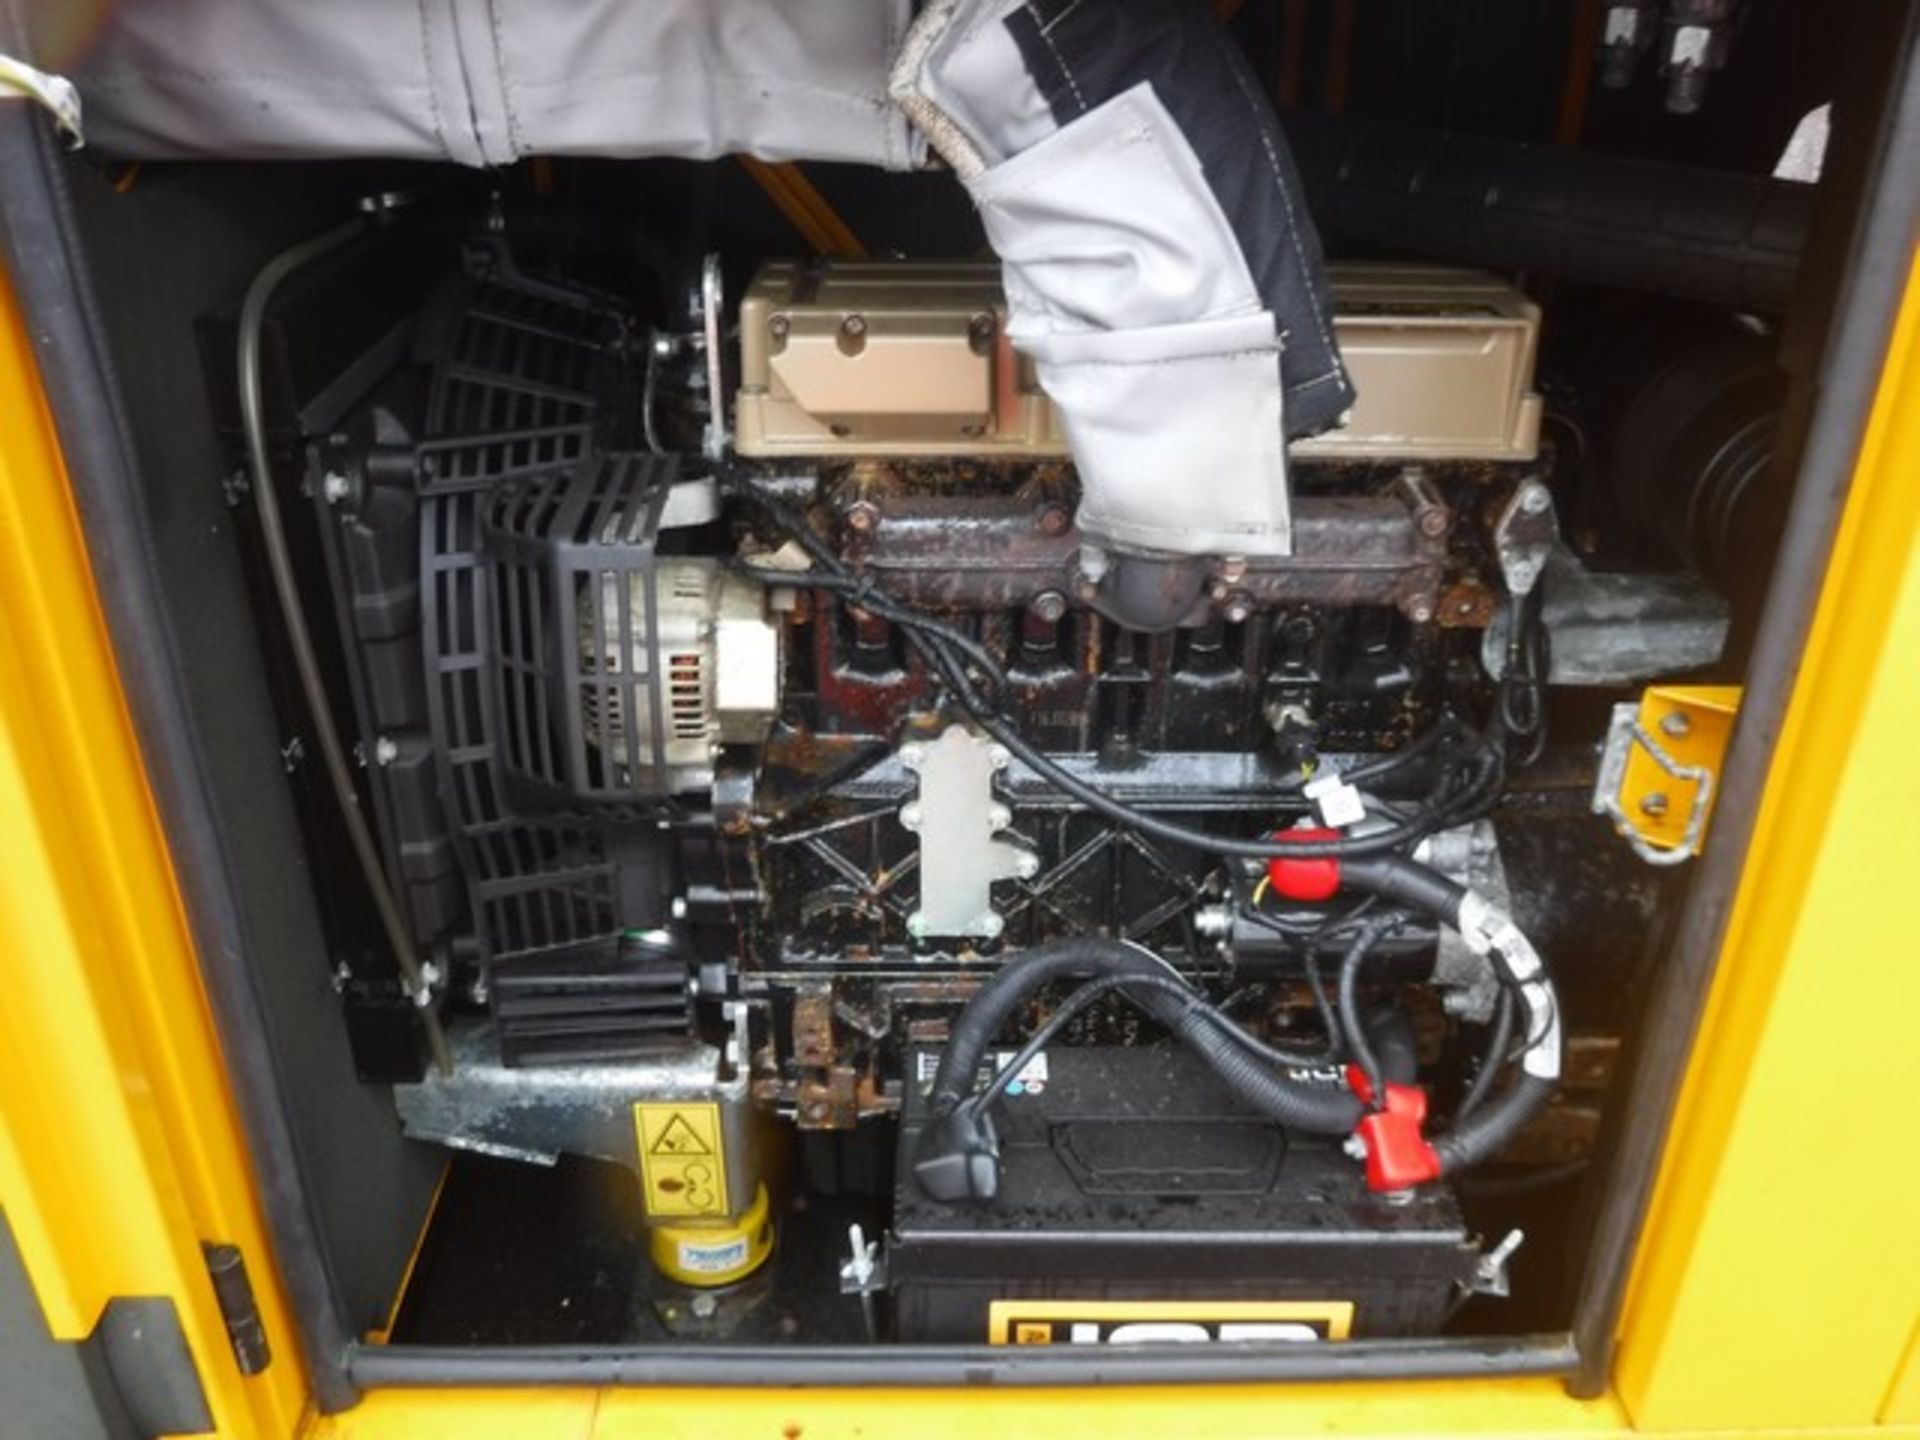 2017 JCB G27QS generator 24.5KVA rate power engine no 4701300610 1081hrs (not verified) - Image 7 of 11